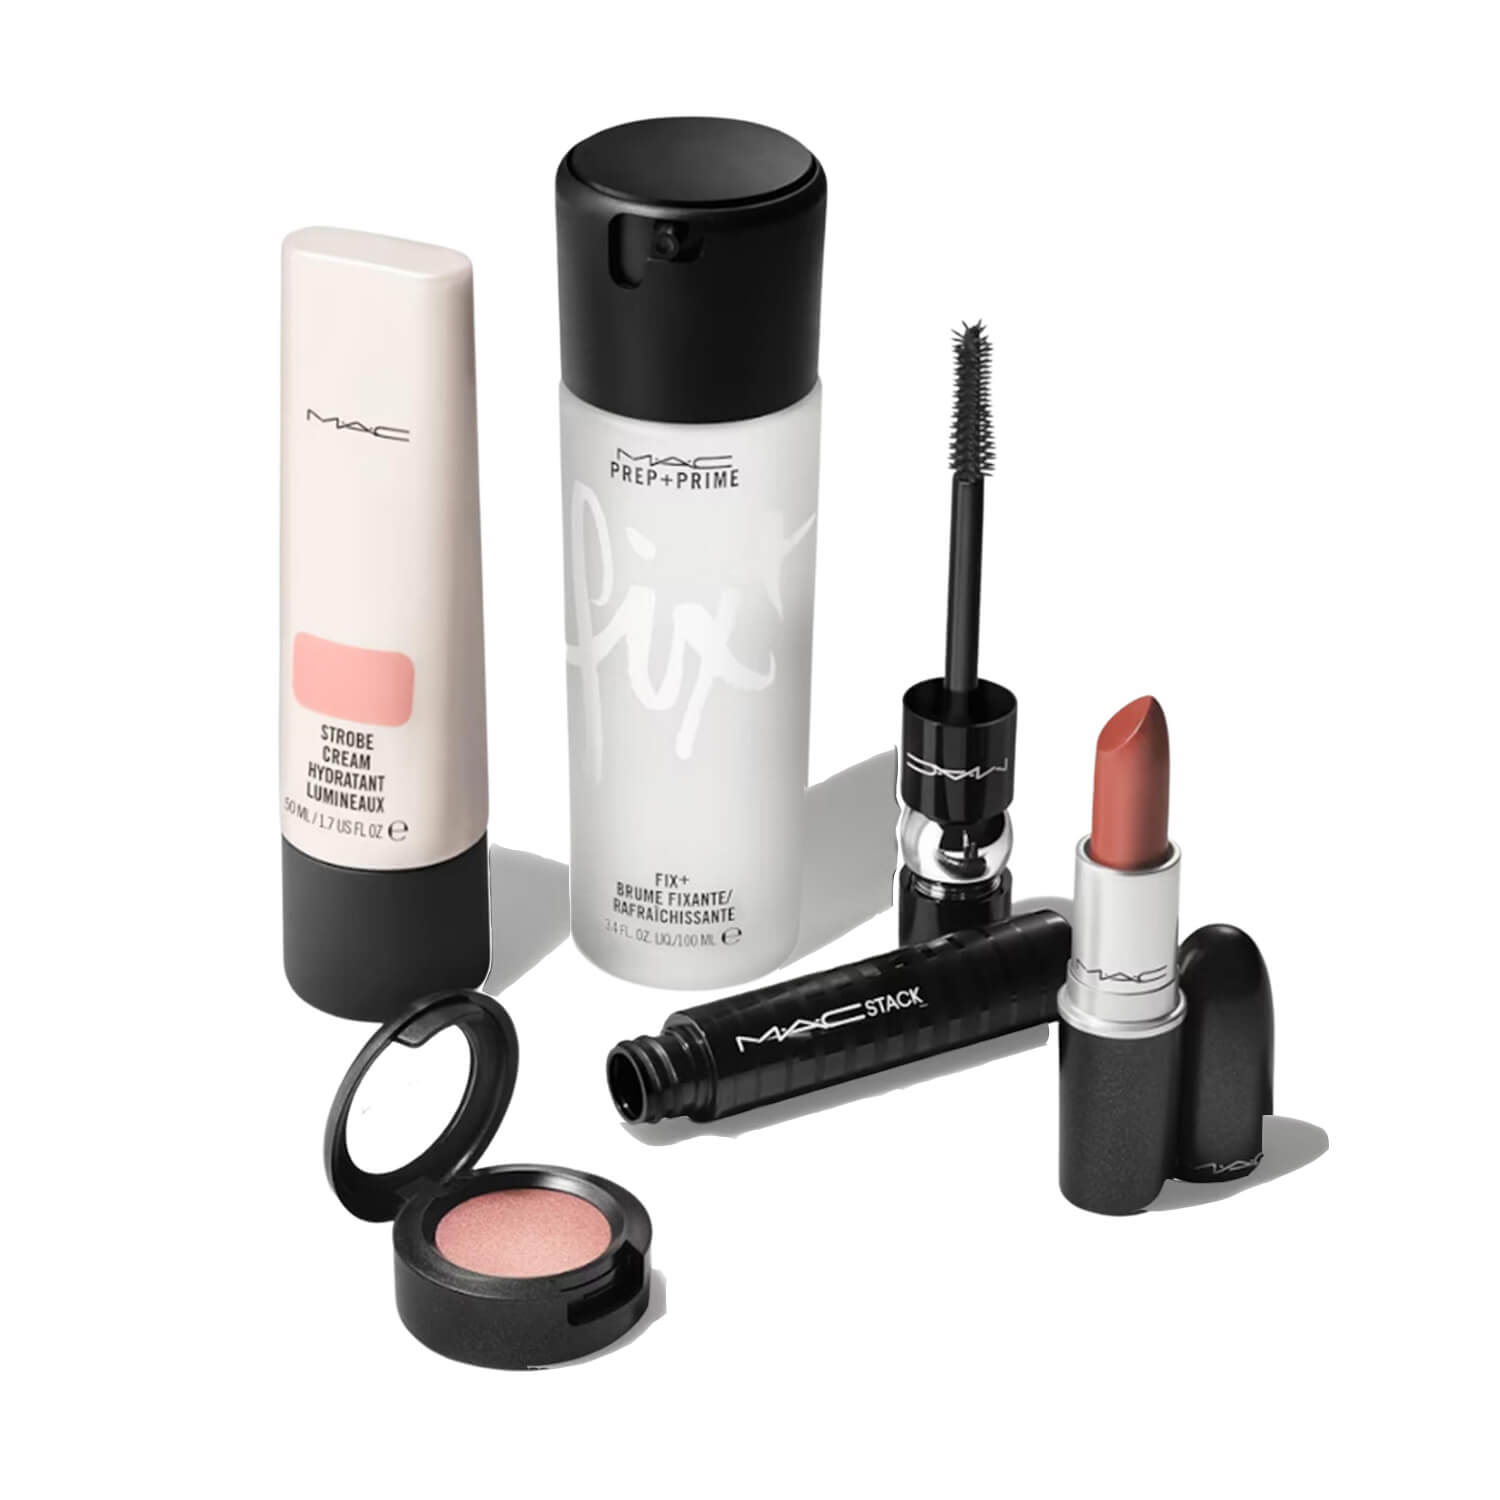 M.a.c Makeup Gift Set - Buy M.a.c Makeup Gift Set online in India